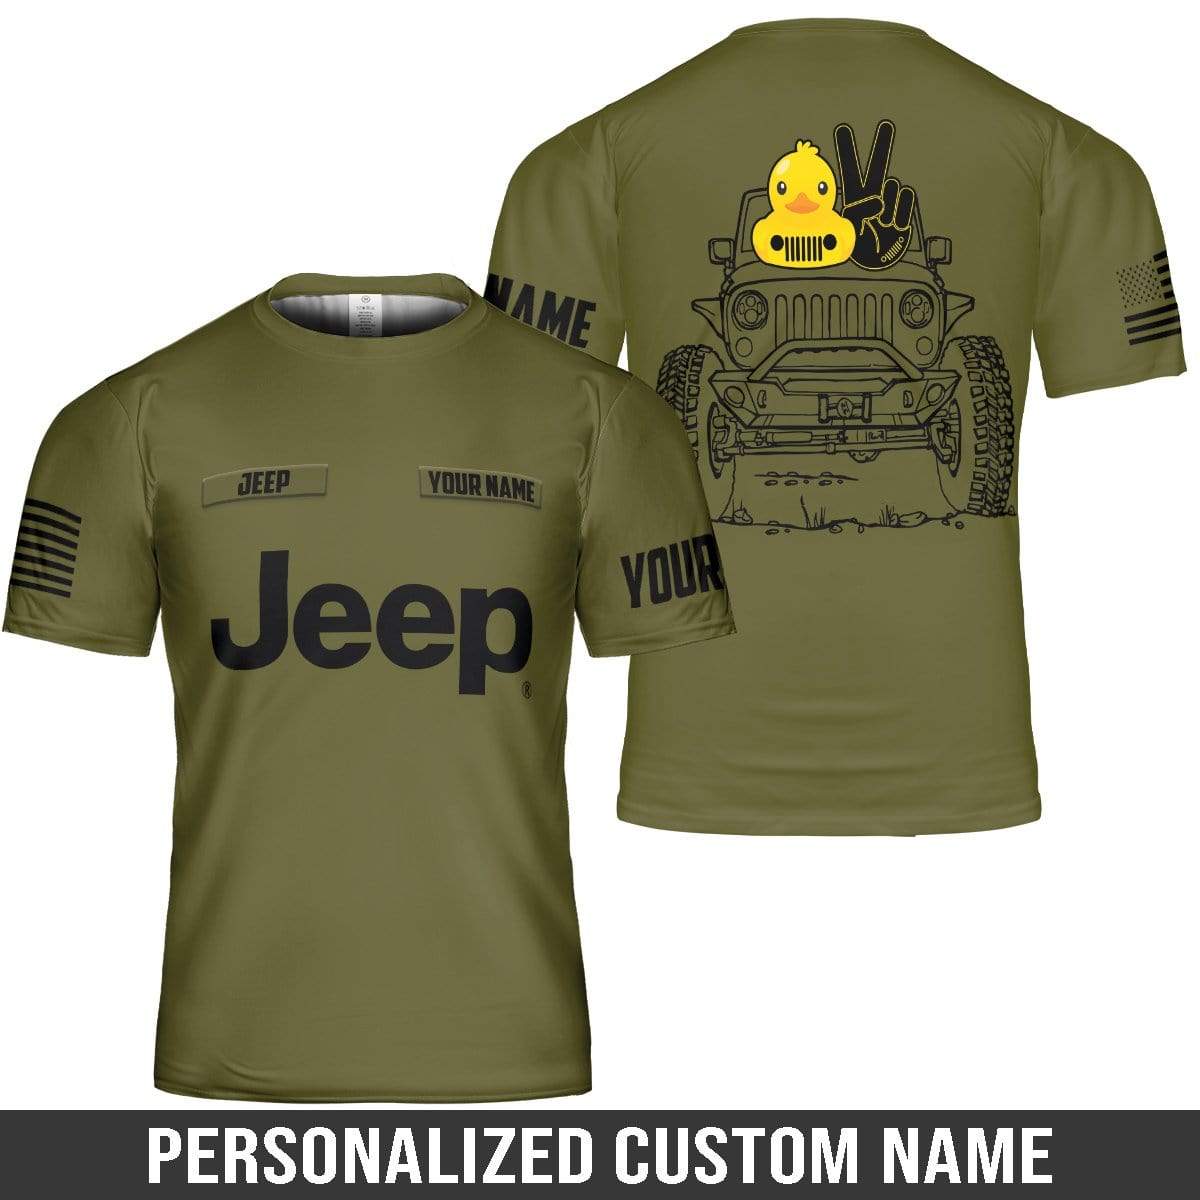 custom-name-jeep-duck-olive-army-color-unisex-t-shirt-3d